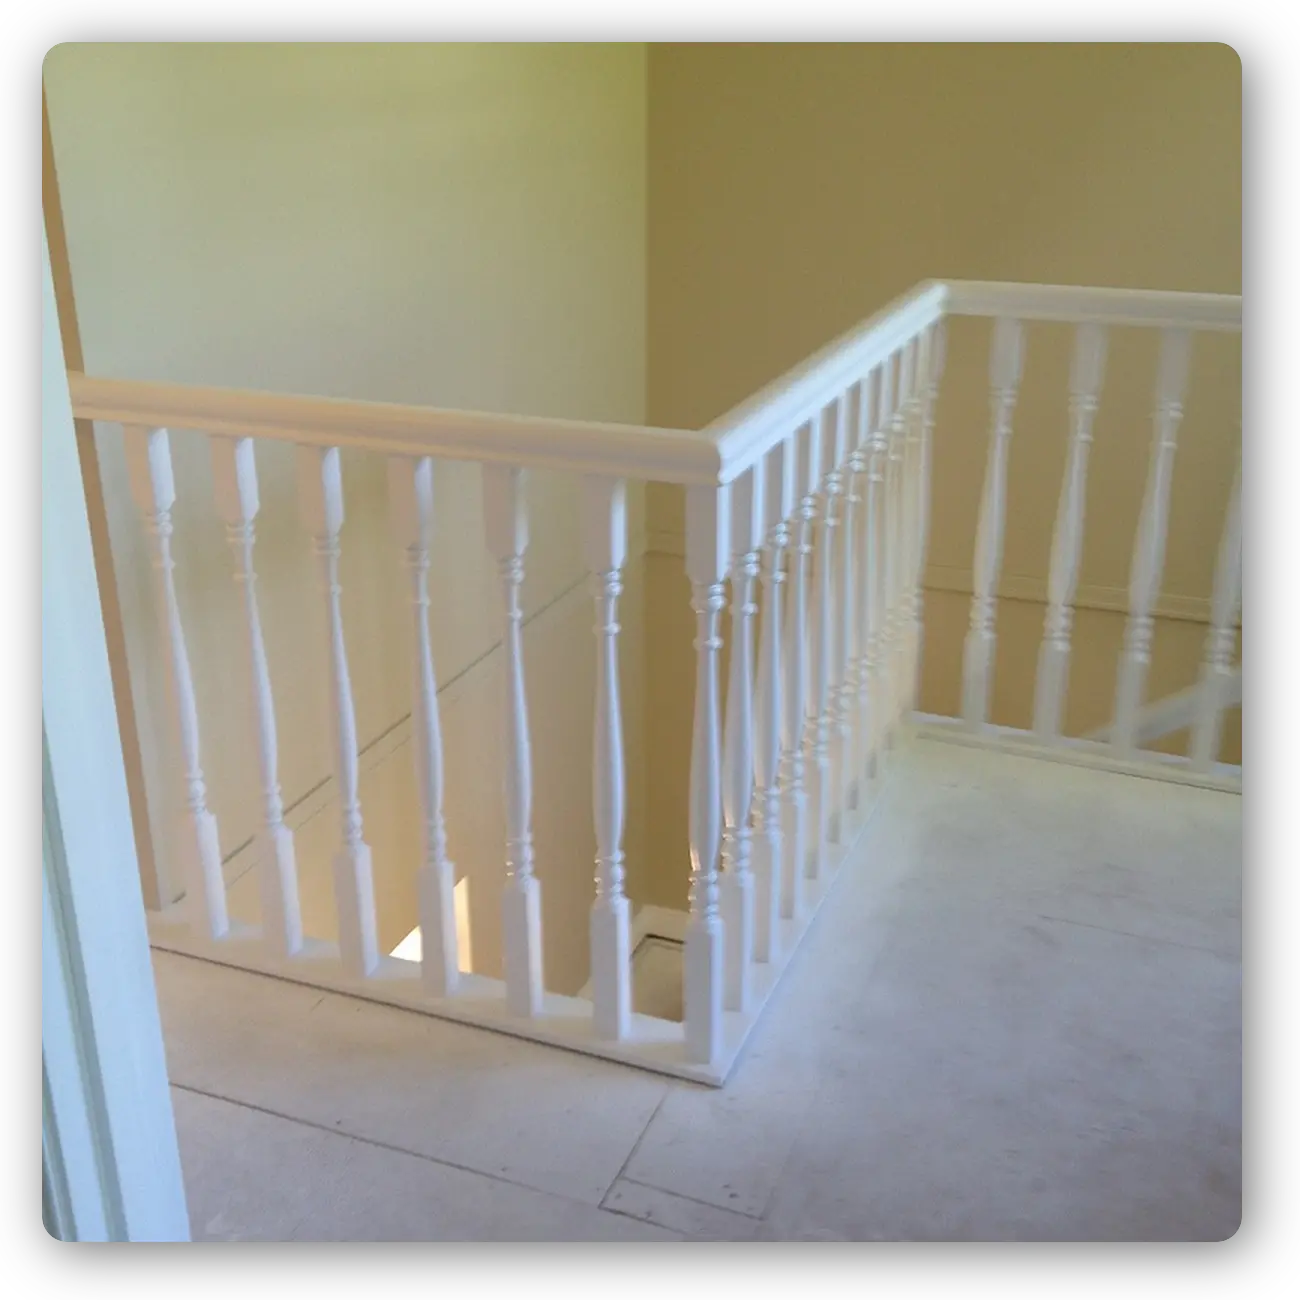 Painting railings and spindles 